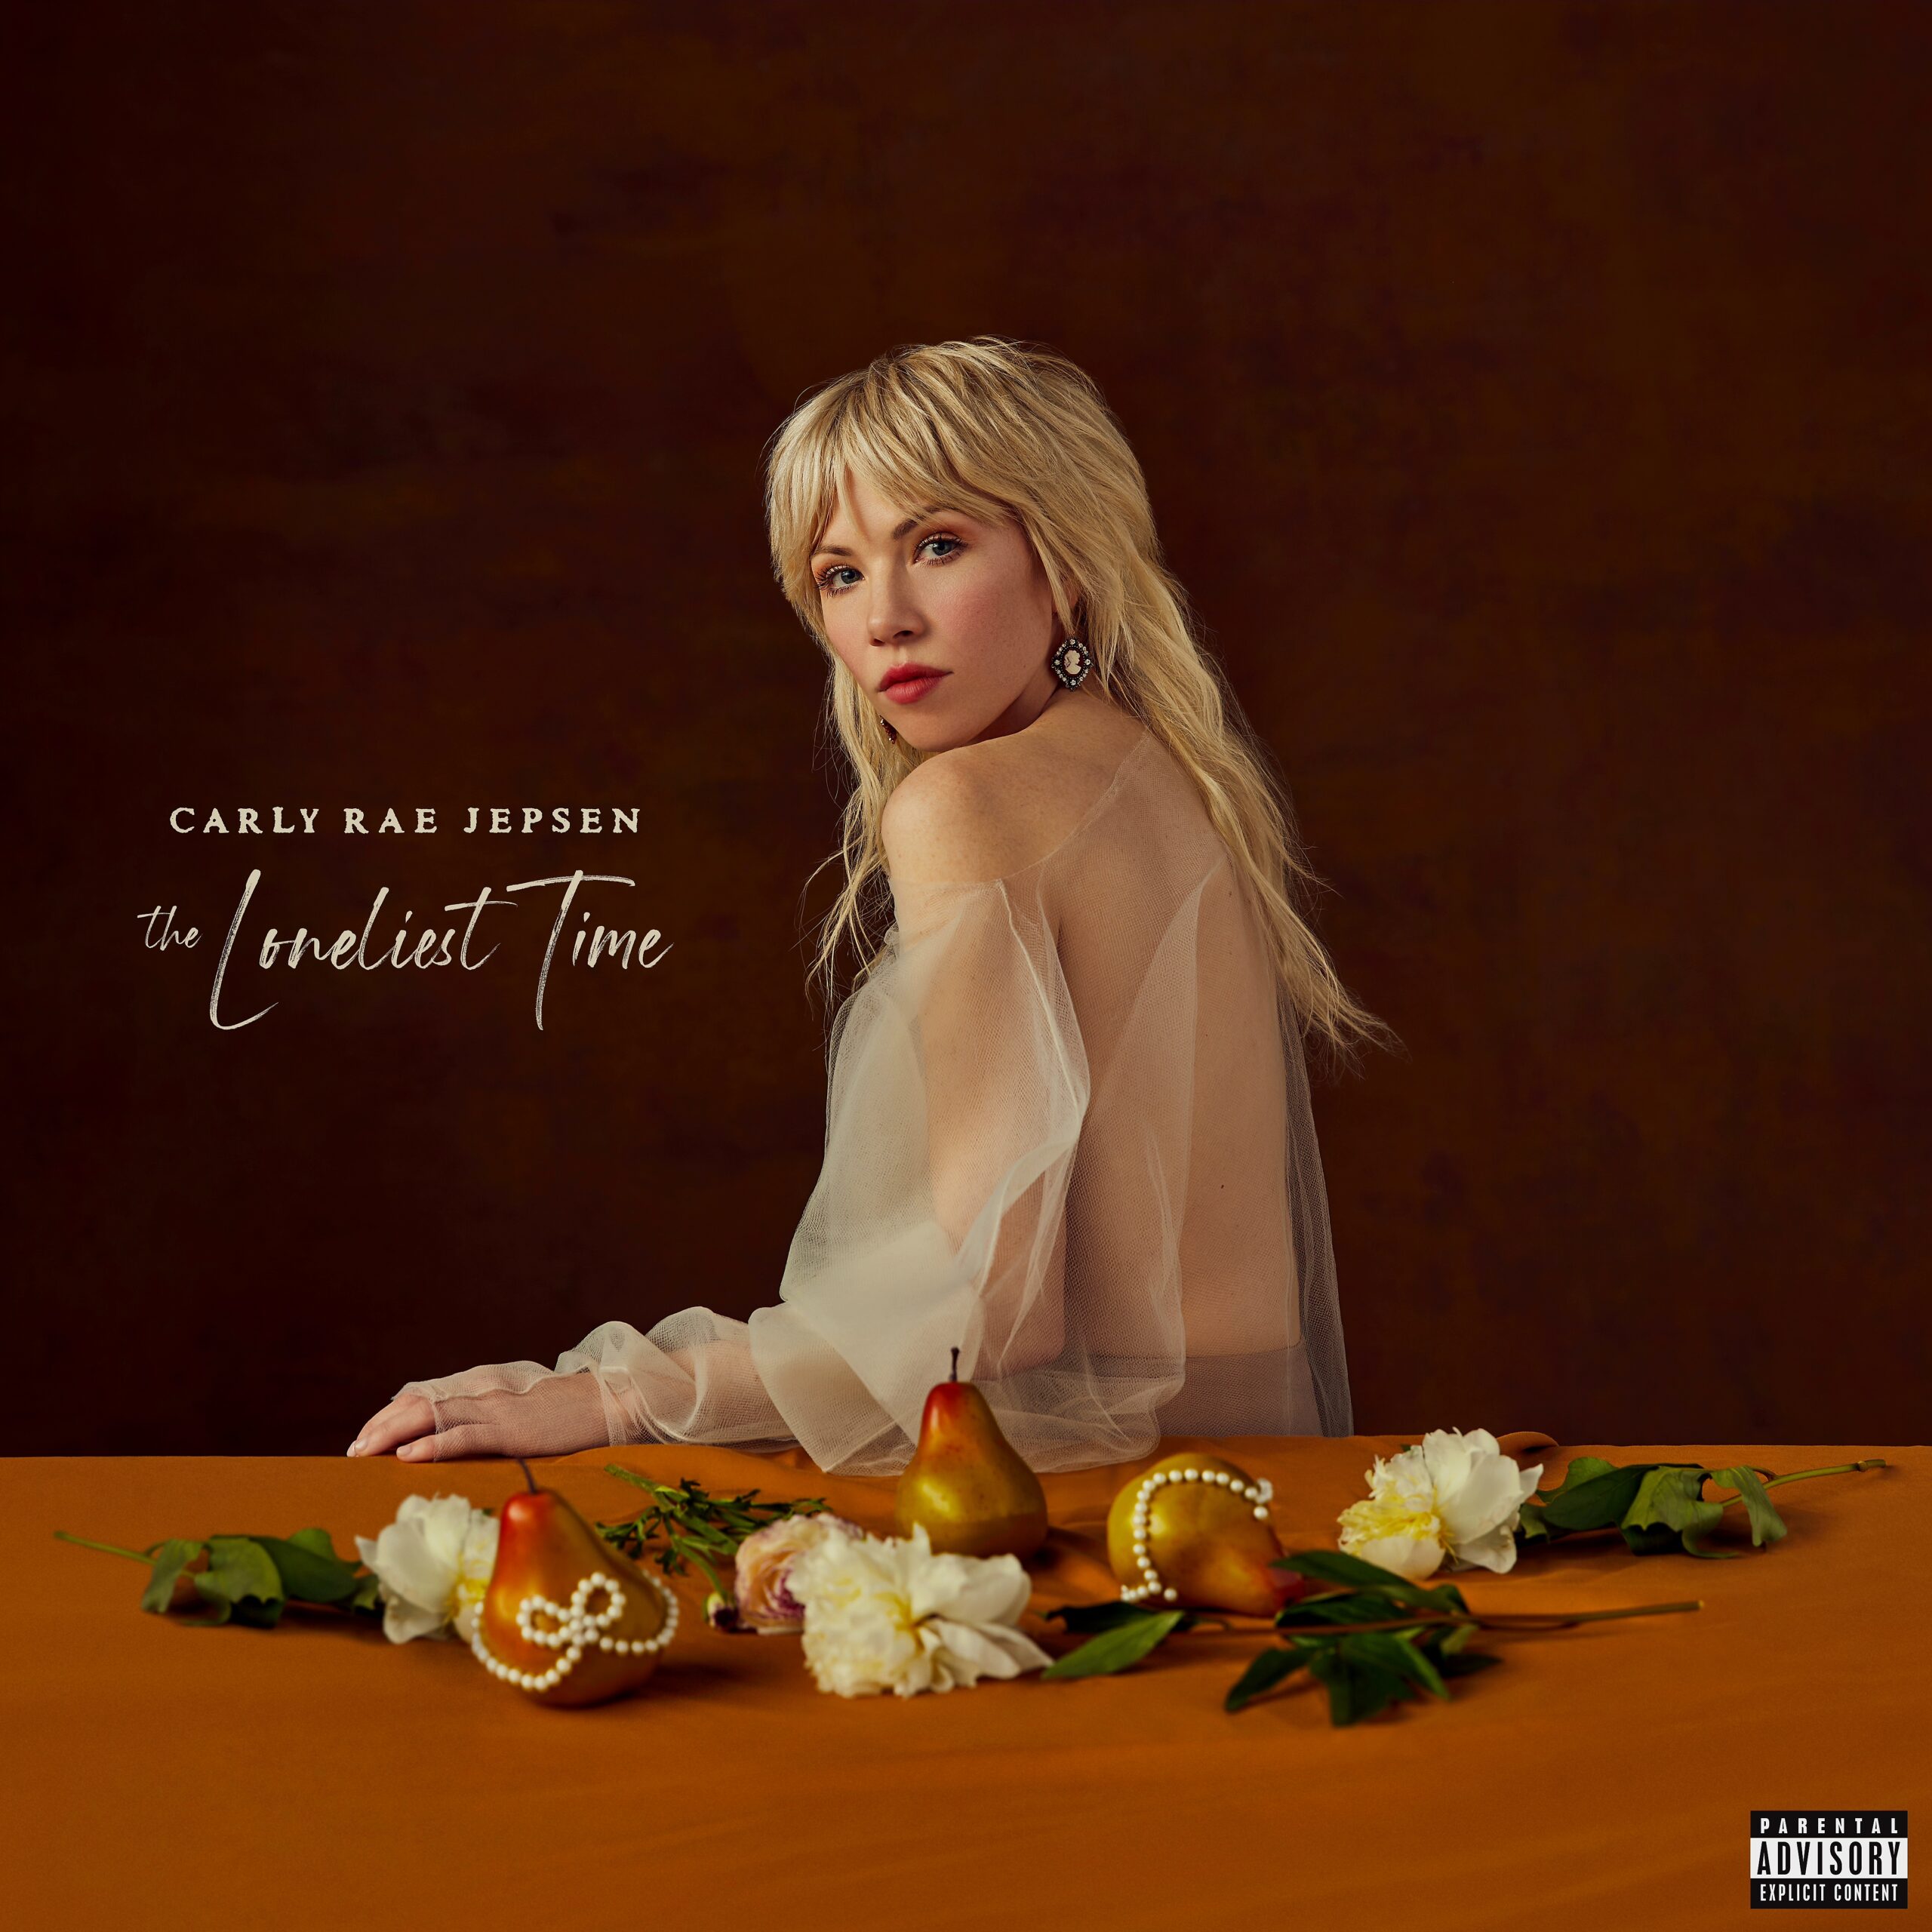 Carly Rae Jepsen releases The Loneliest Time via 360 MAGAZINE.